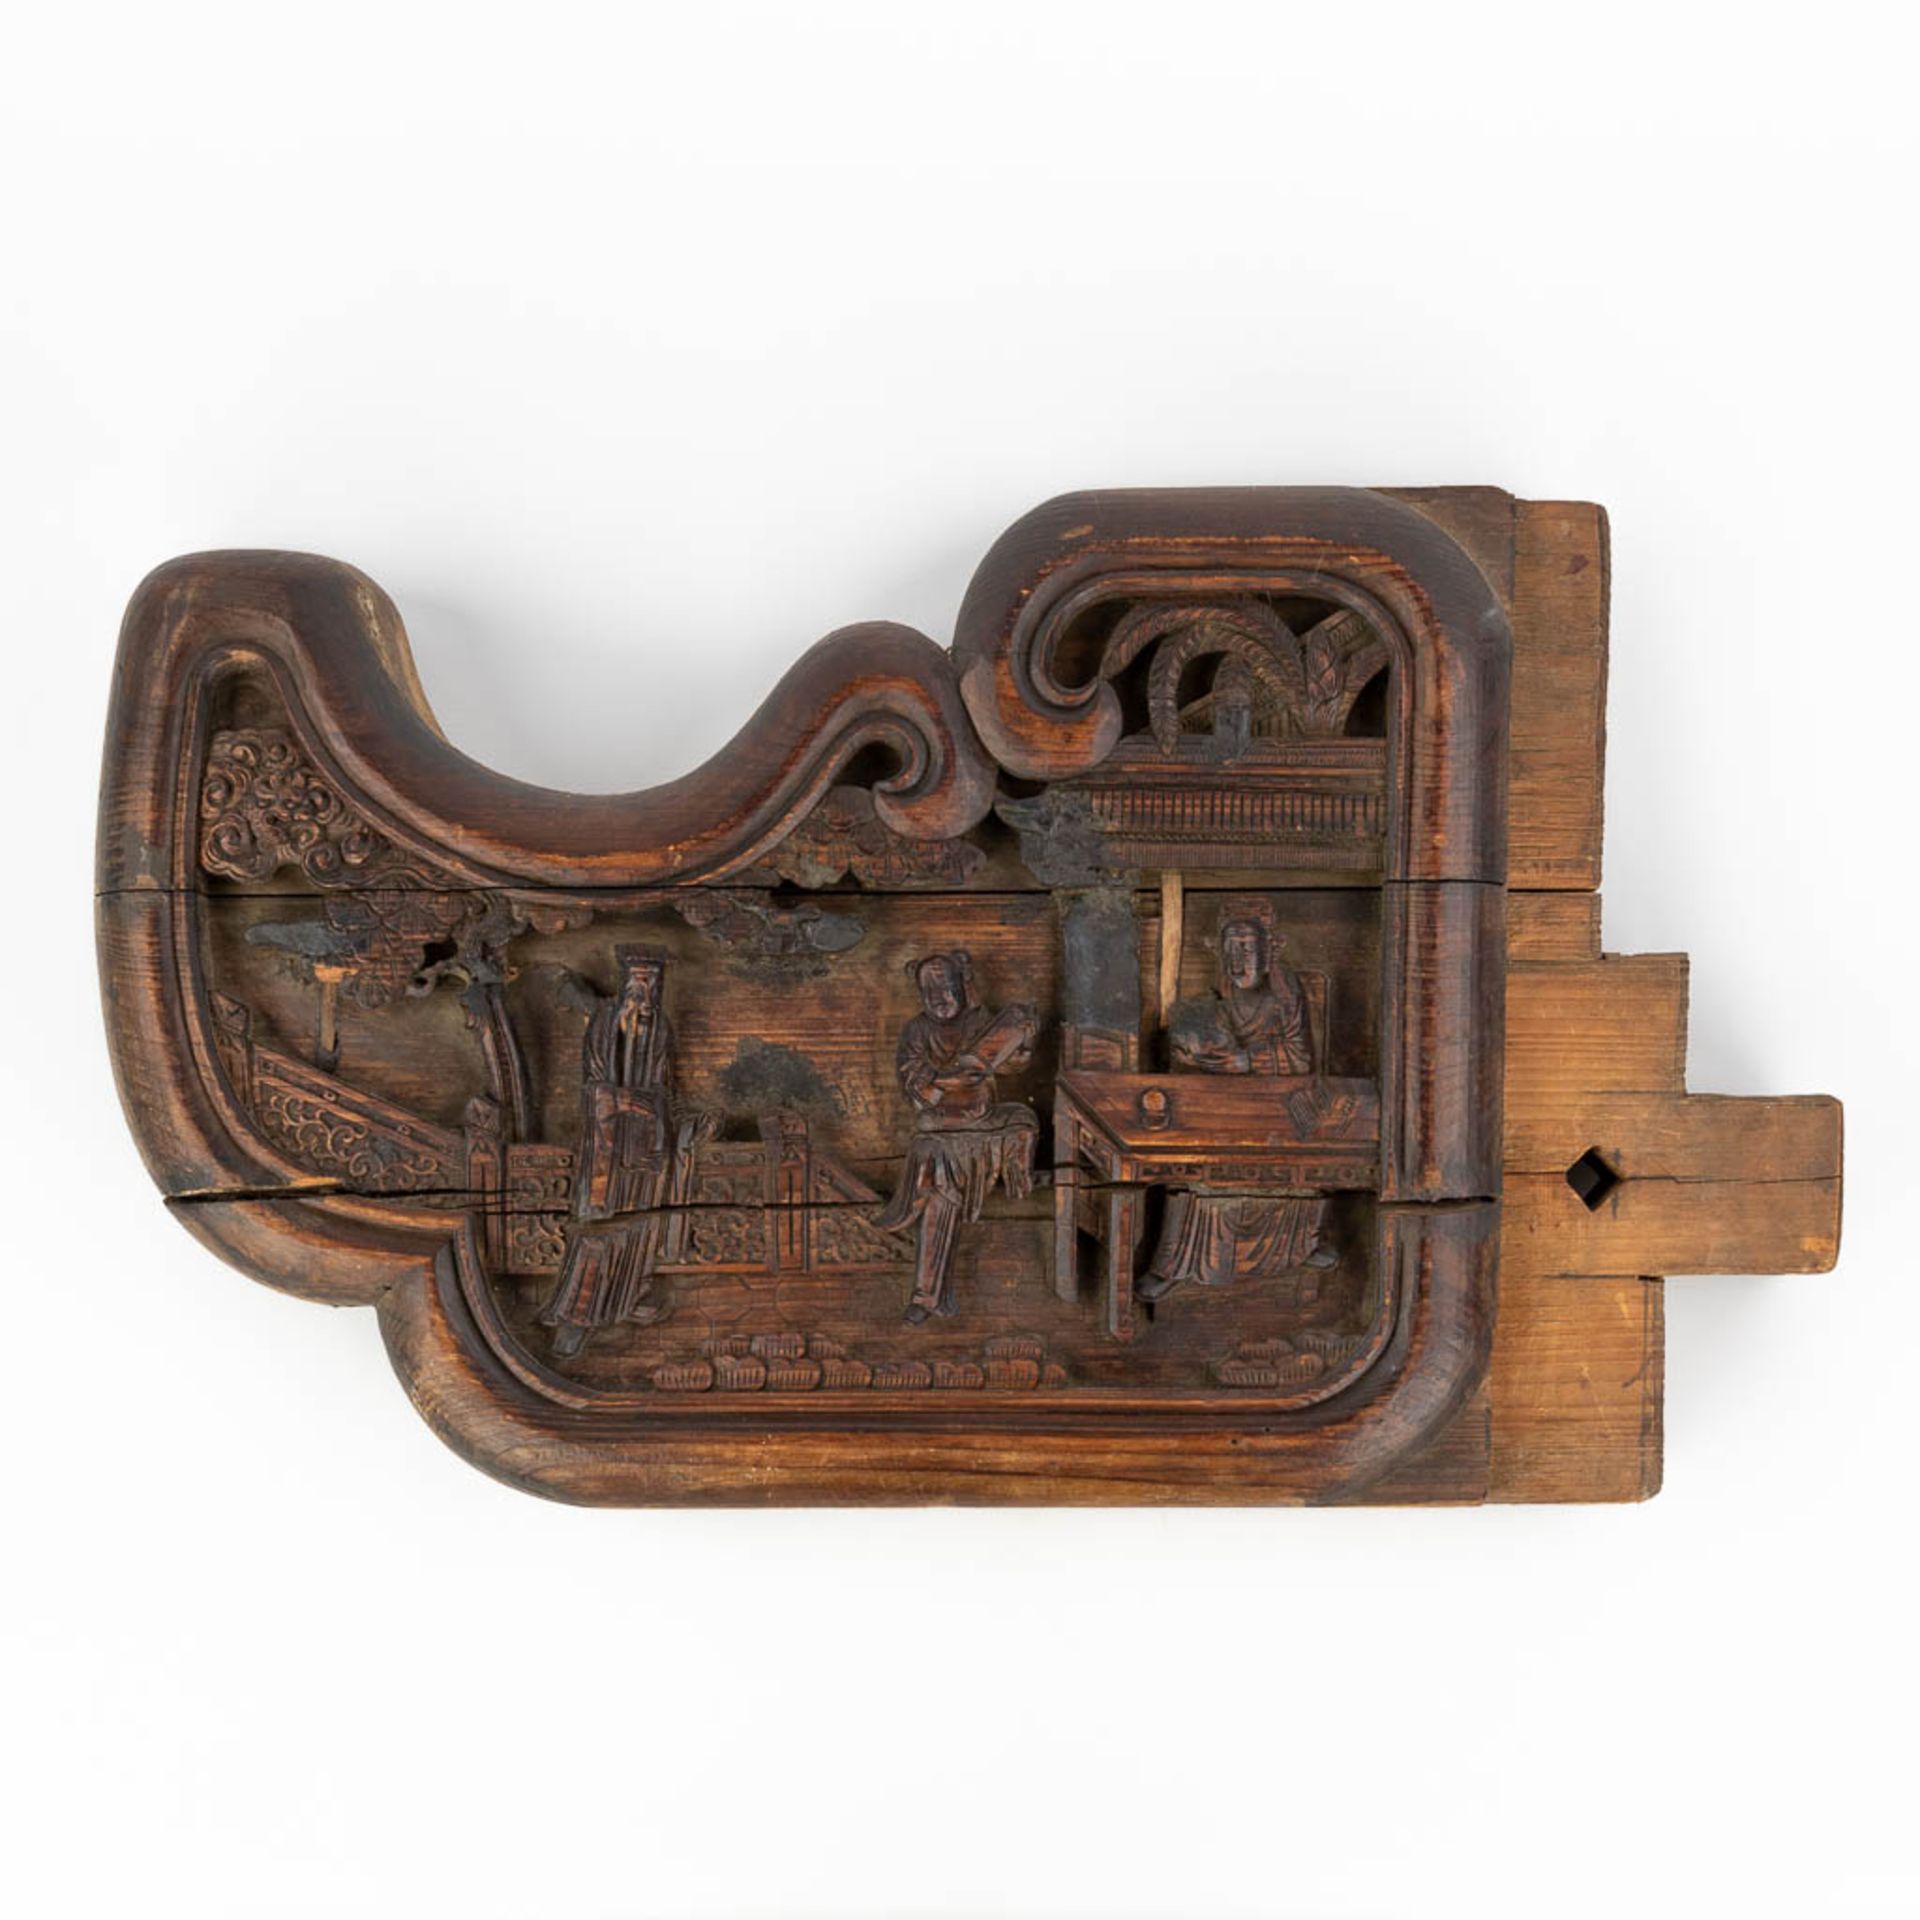 An antique wood sculptured corbel decorated with Asian/Chinese decors and figurines. (L:10 x W:70 x